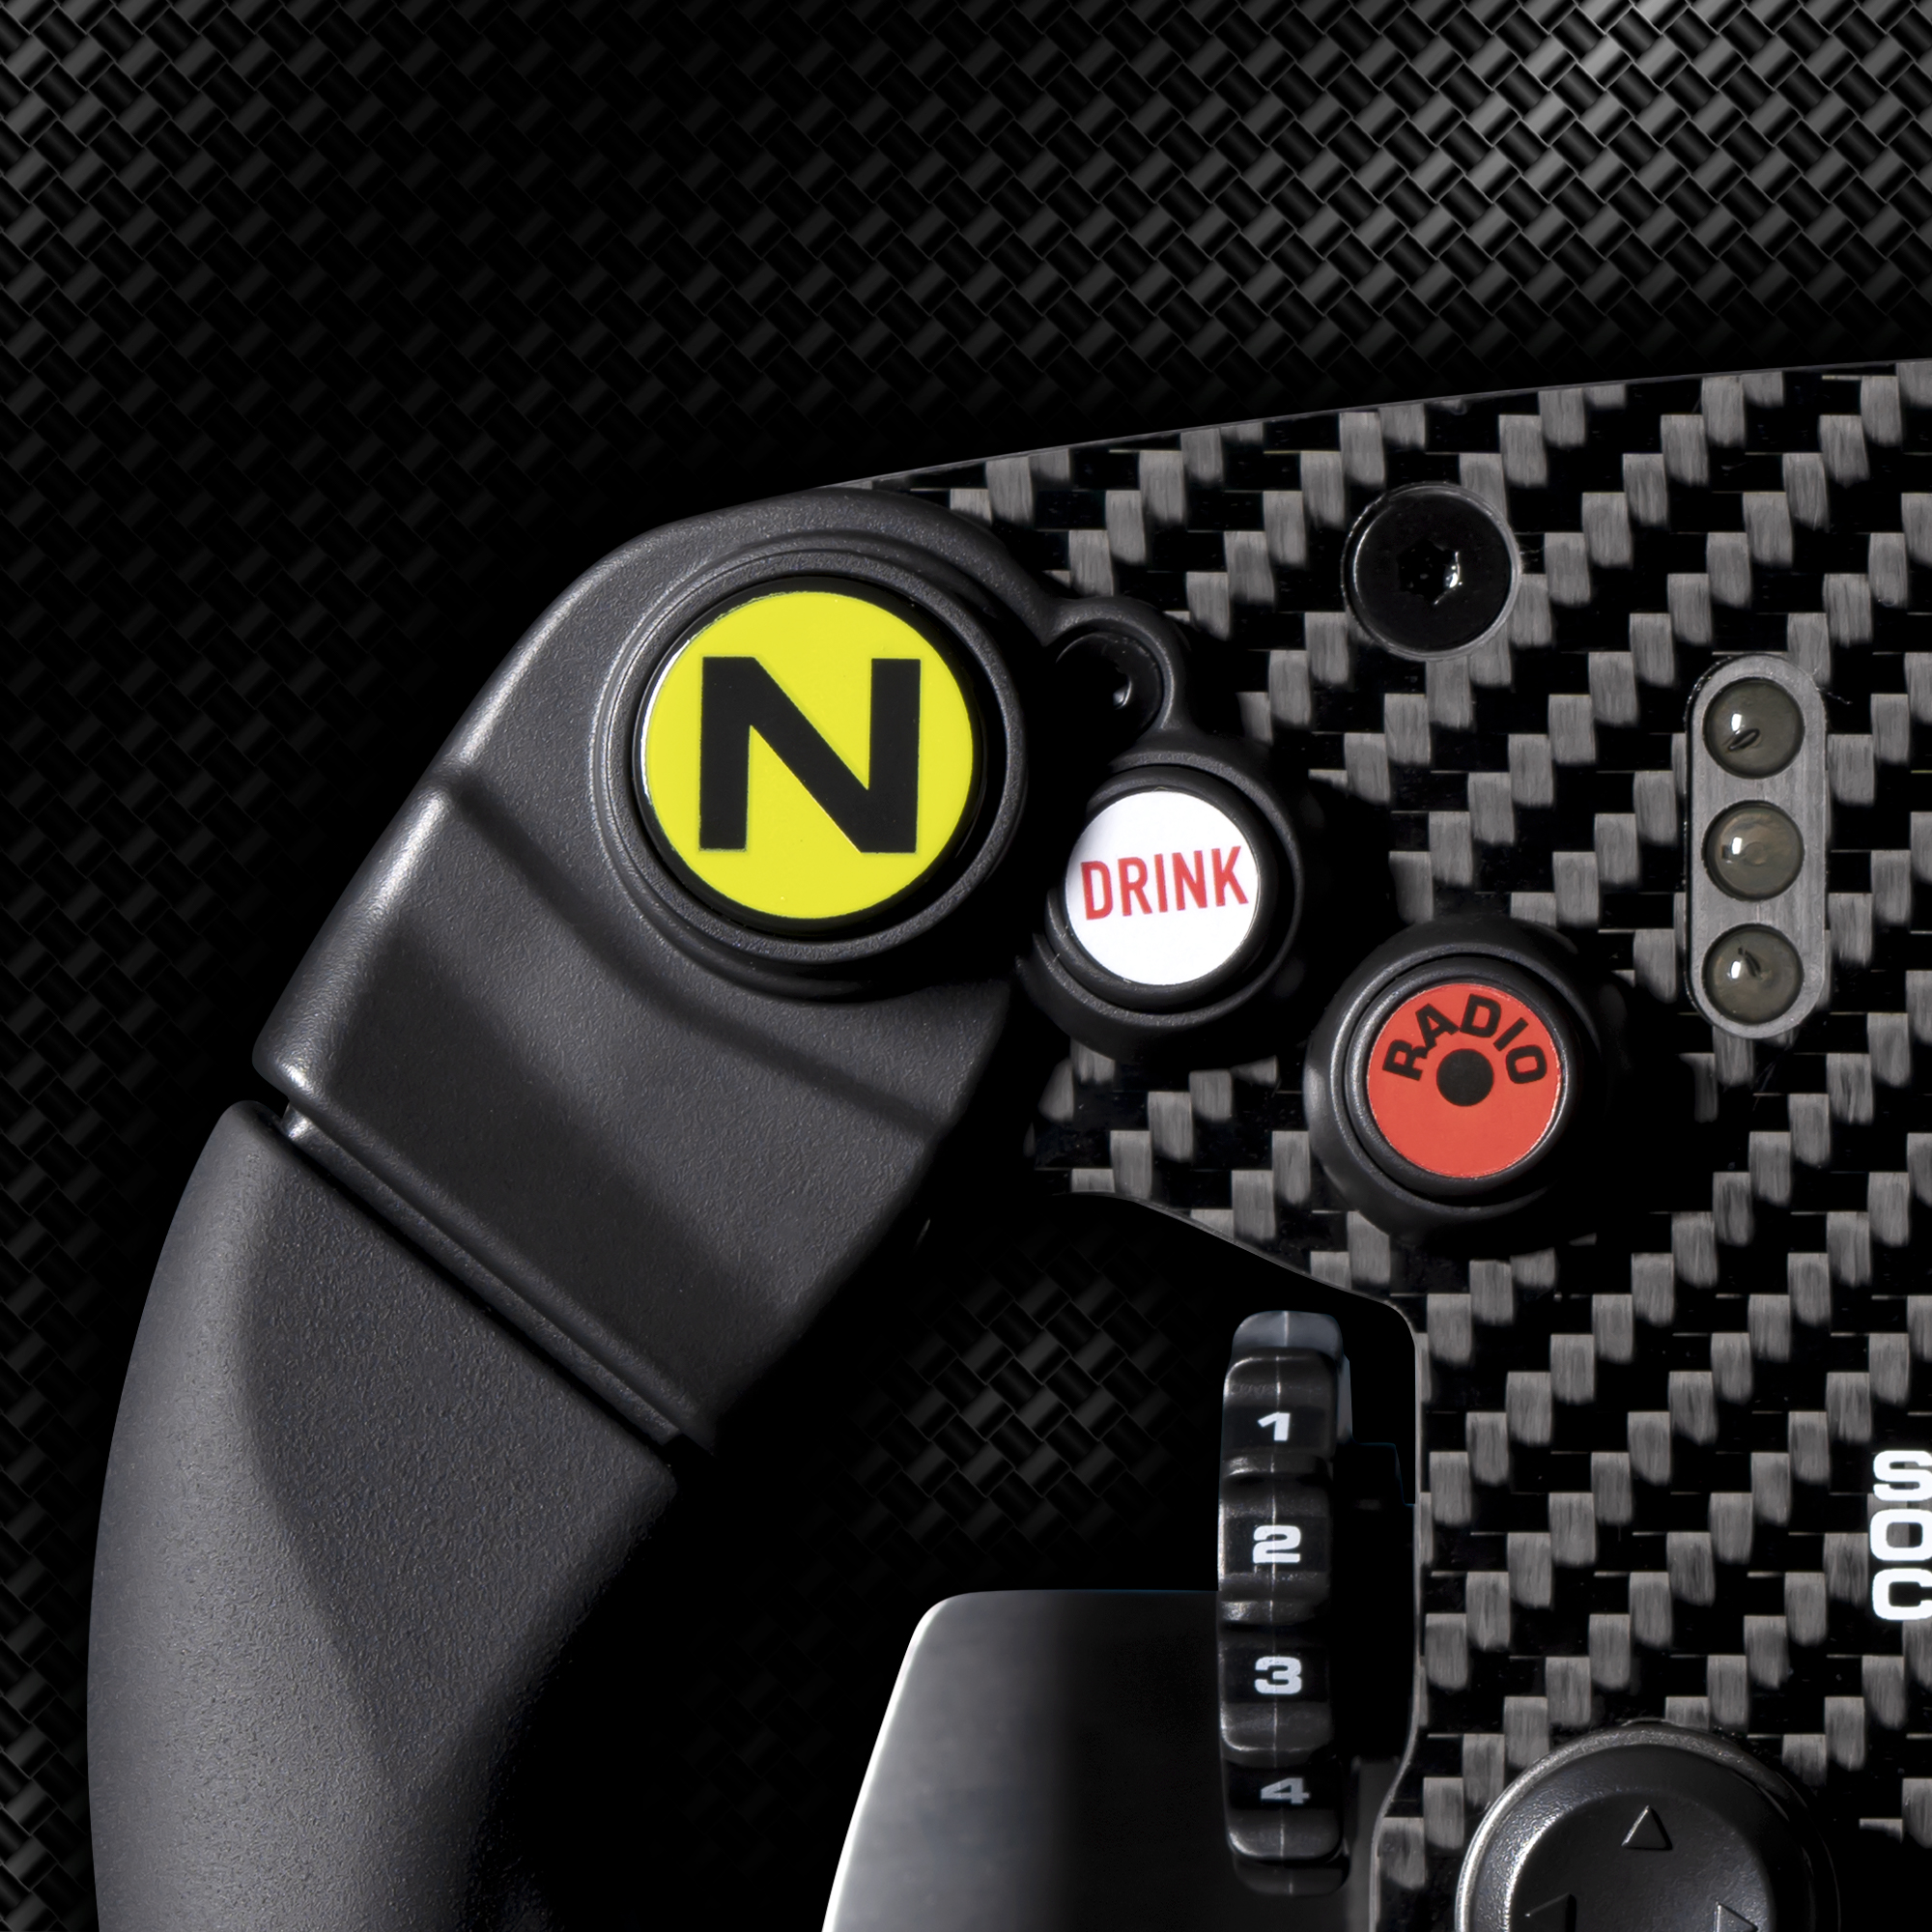 Thrustmaster Ferrari F1 Wheel Add-On for PC, Xbox One and PS4